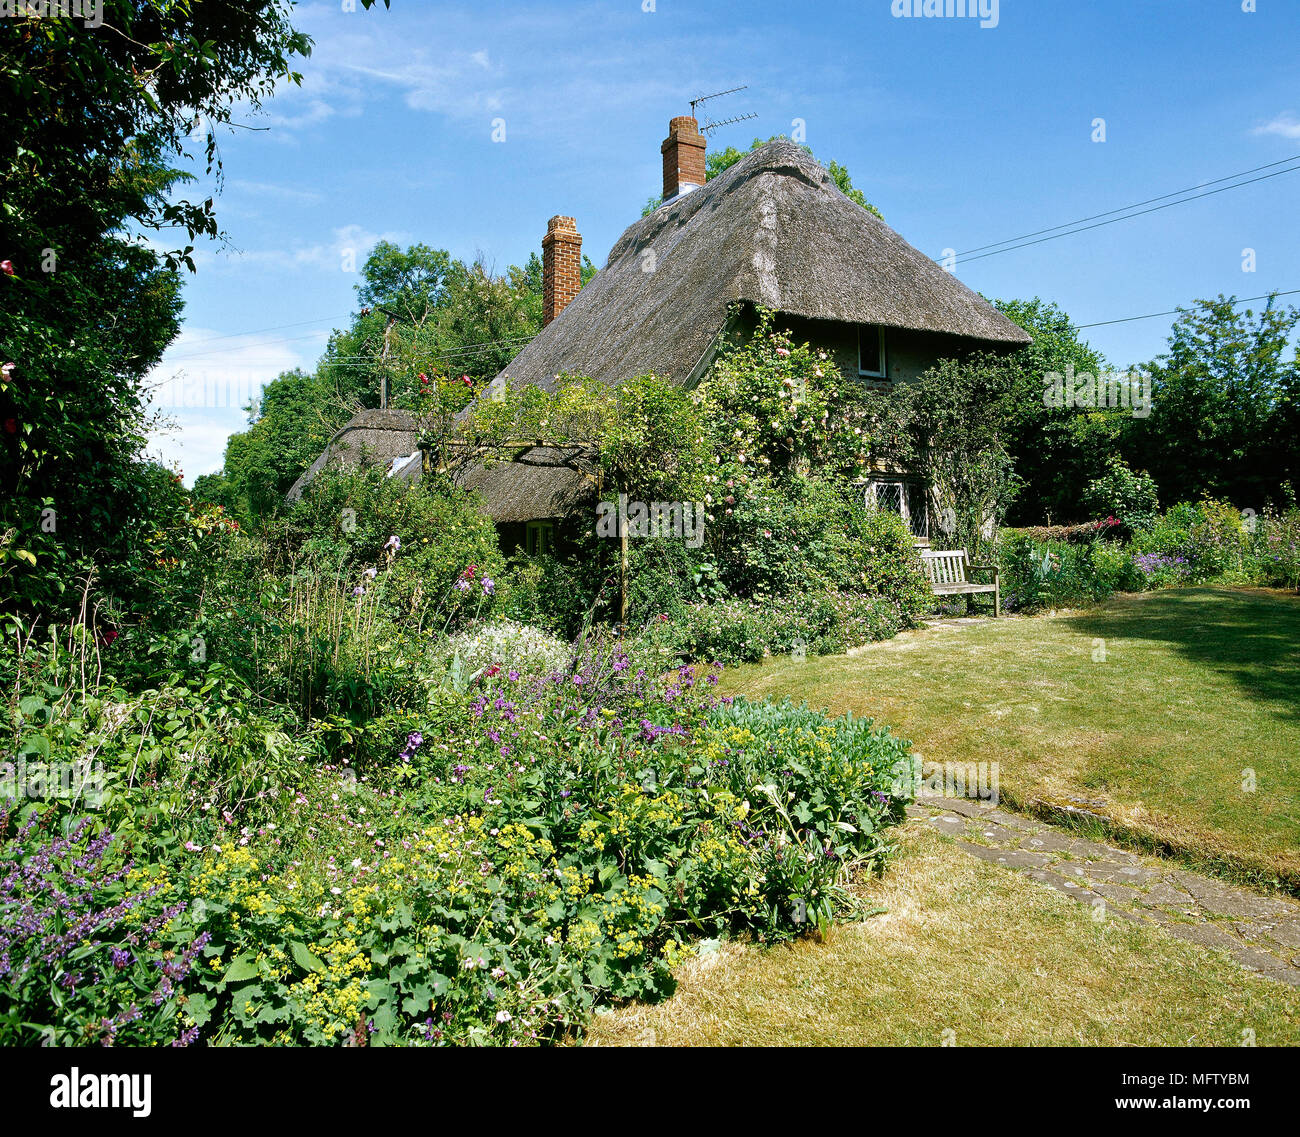 An exterior of a detached country cottage with thatched roof, garden with lawn and flower borders, Stock Photo